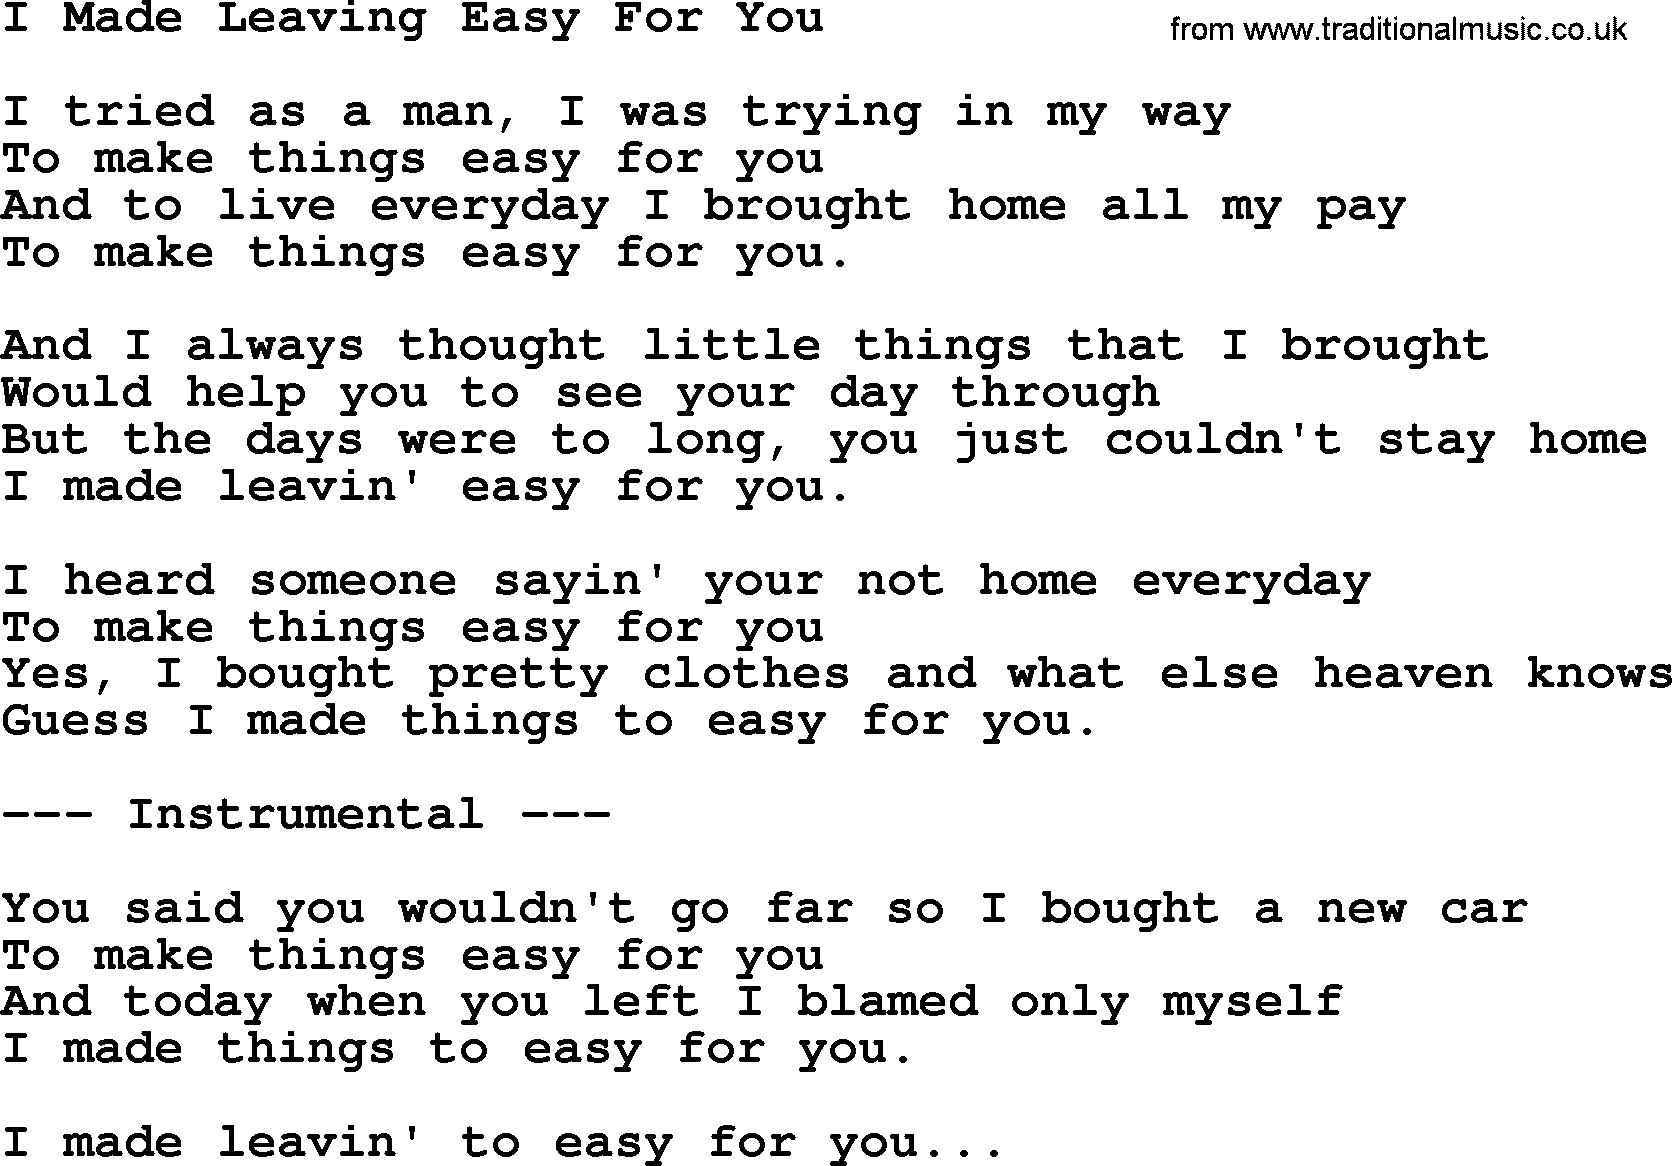 George Jones song: I Made Leaving Easy For You, lyrics